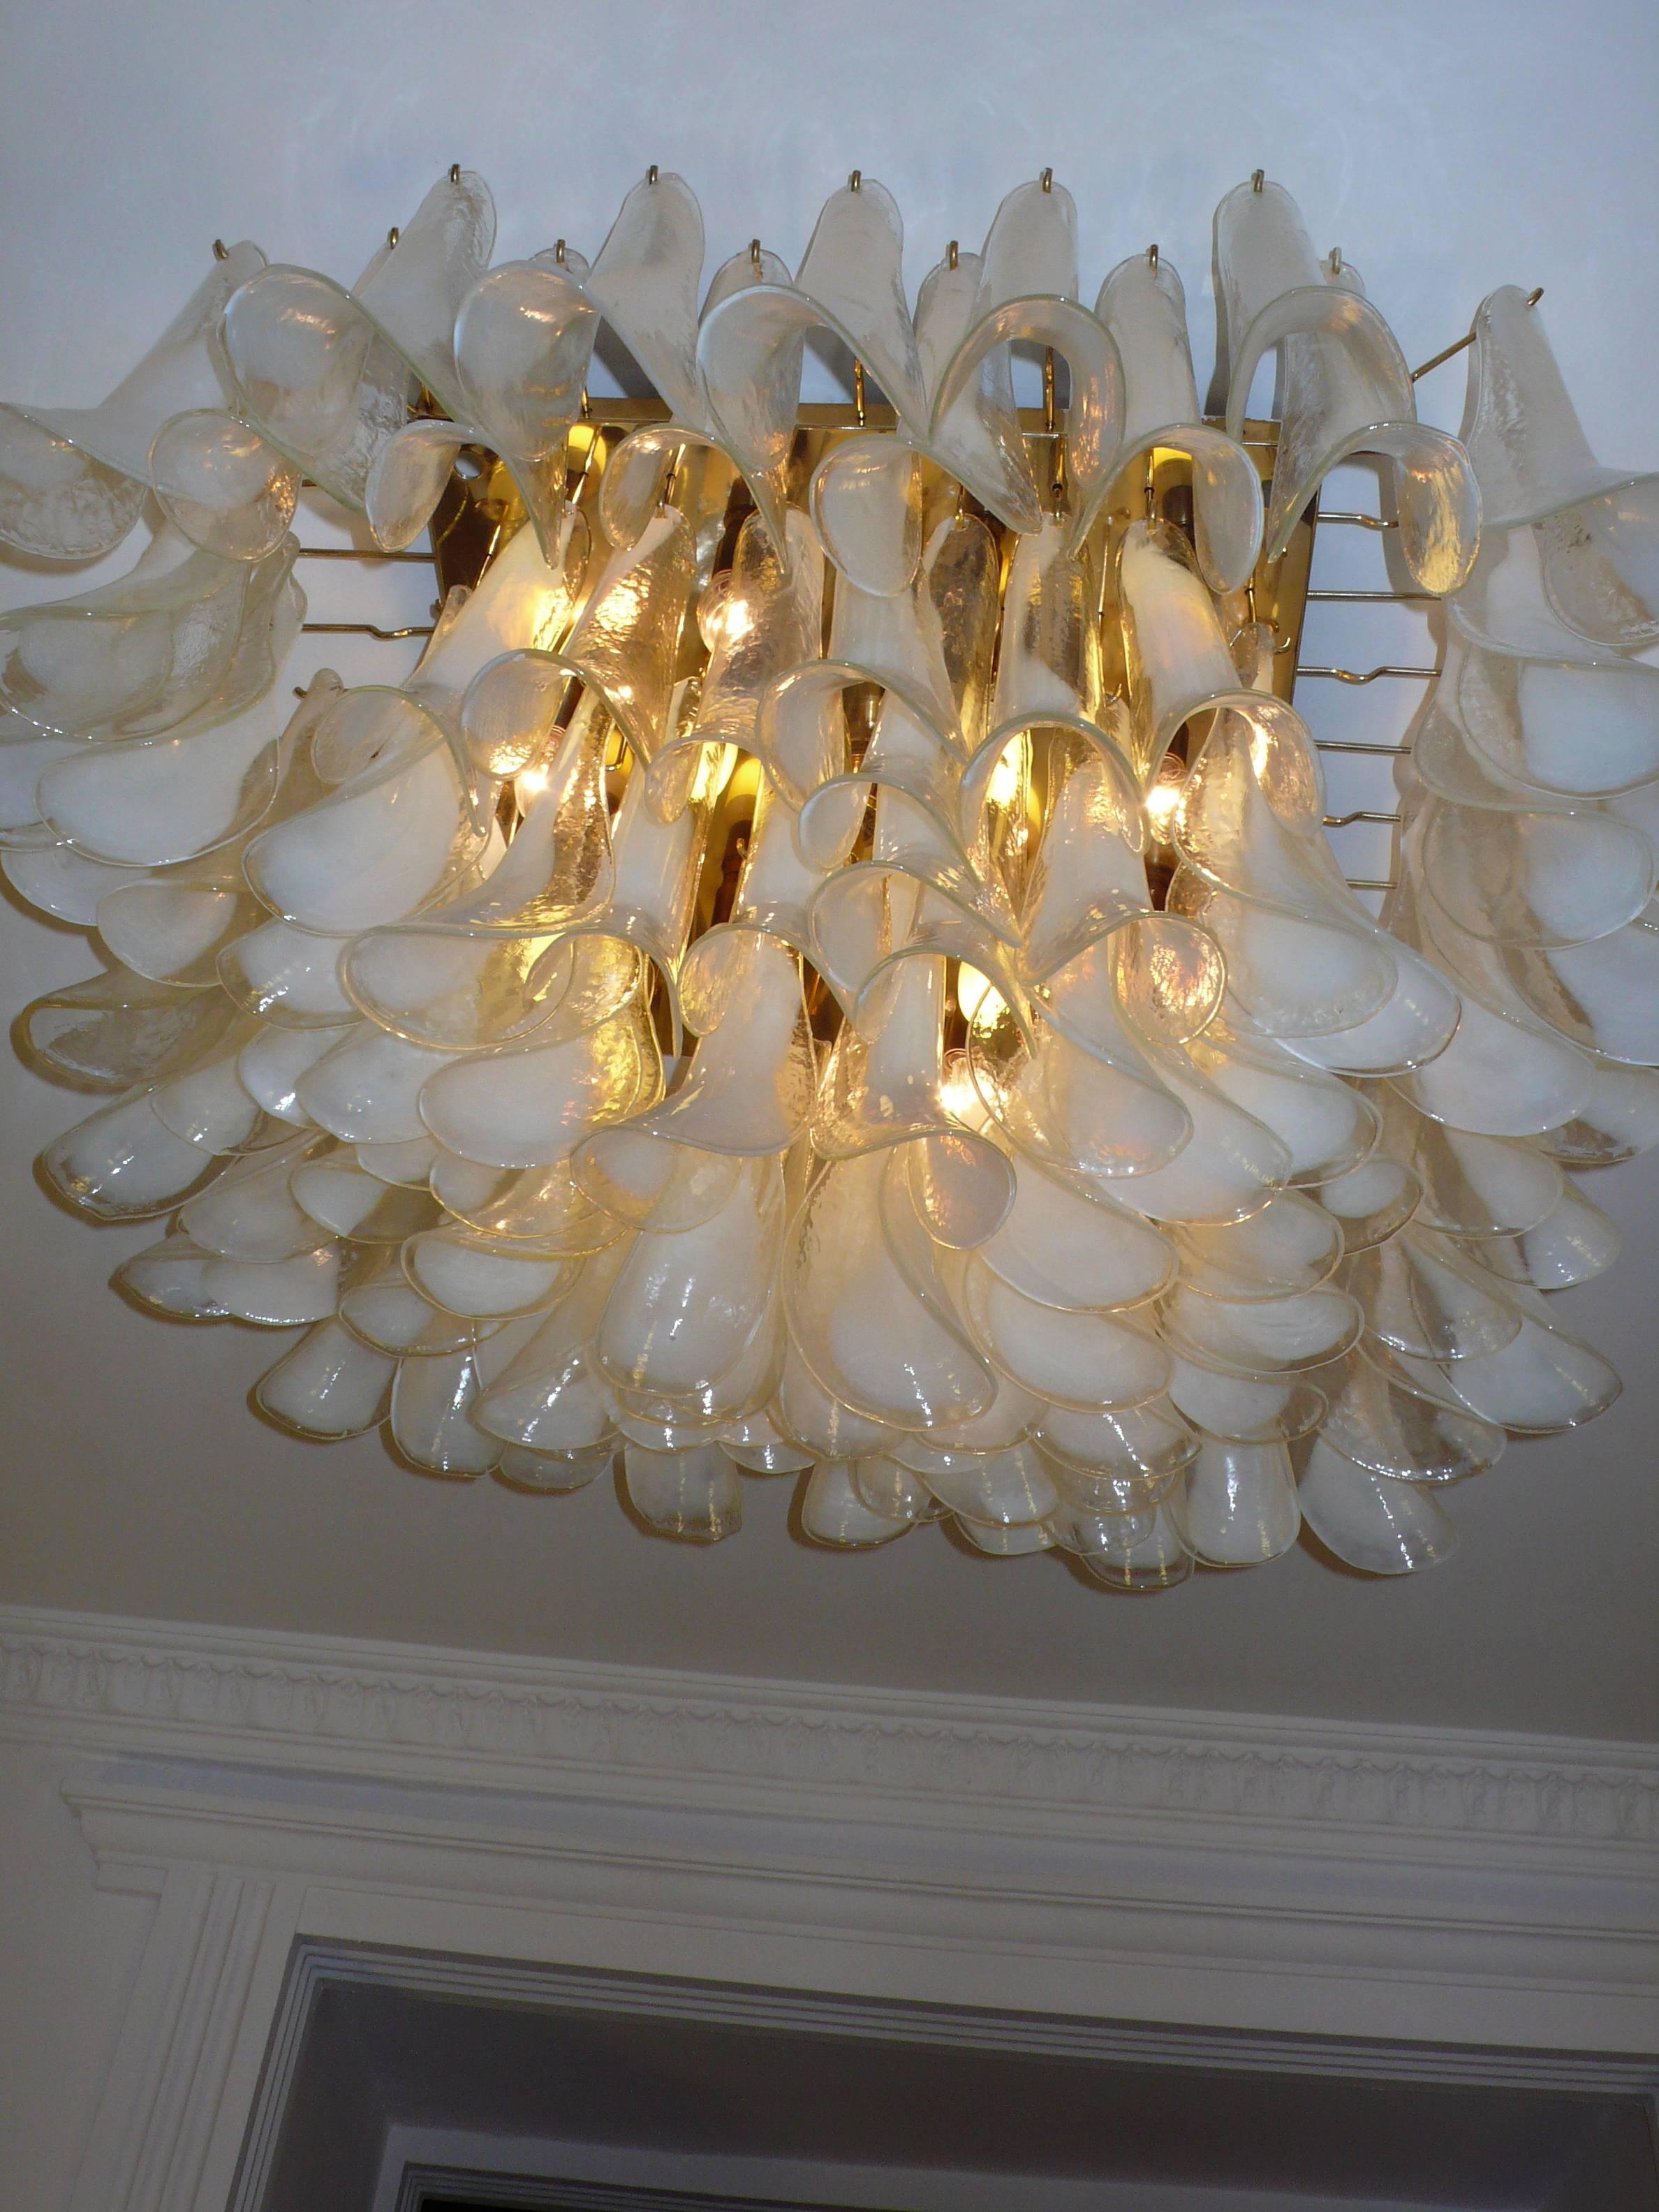 Spectacular chandelier 126 petals blown glass by Murano. 

Available two item.